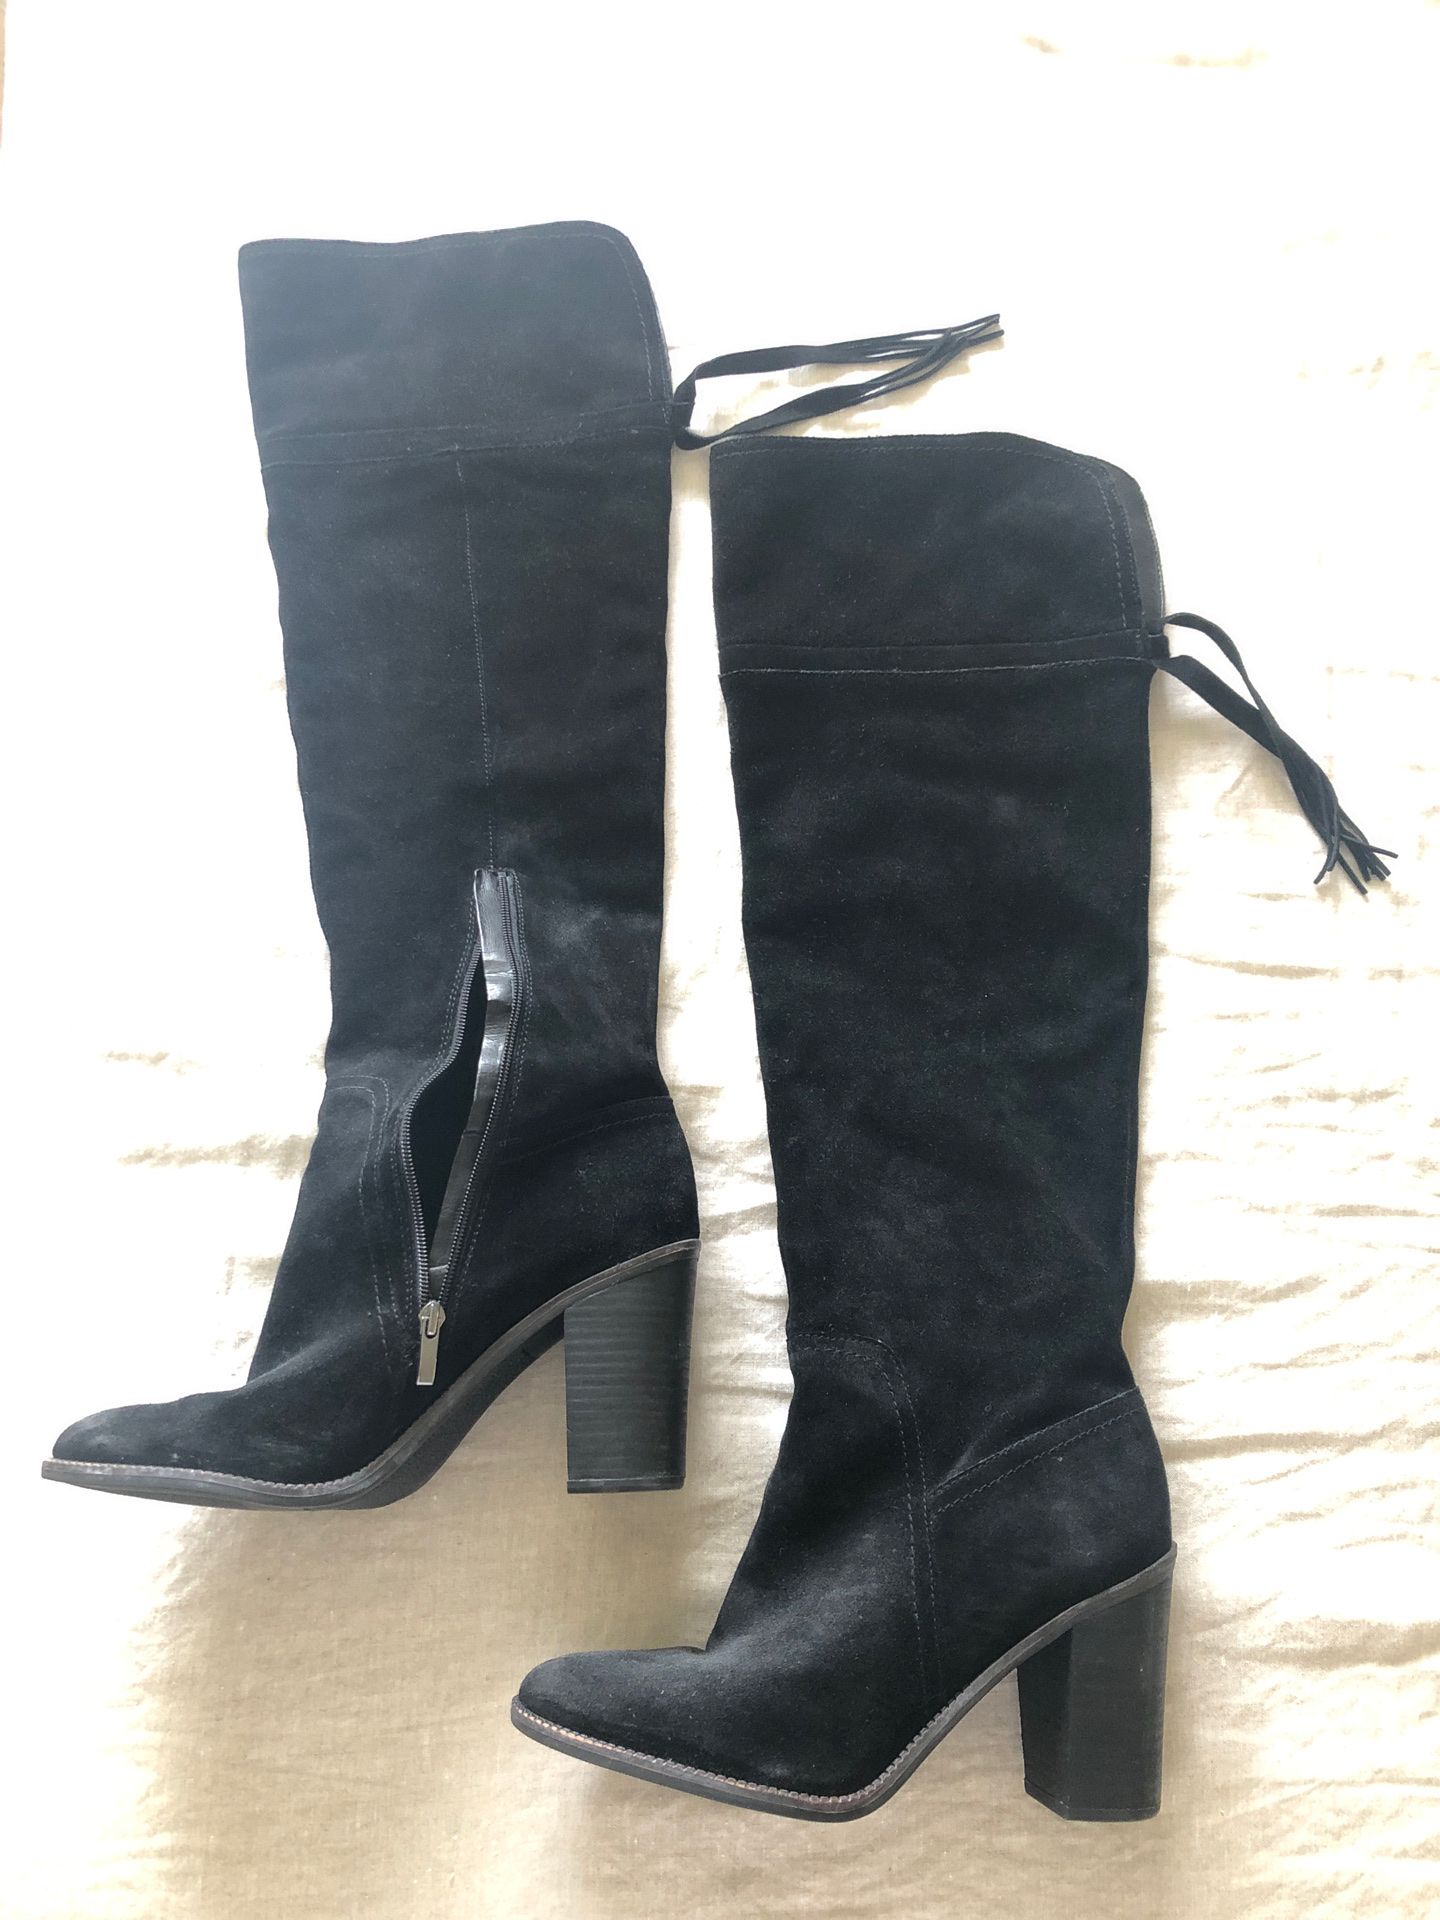 Black suede over the Knee boots Women’s Size 12